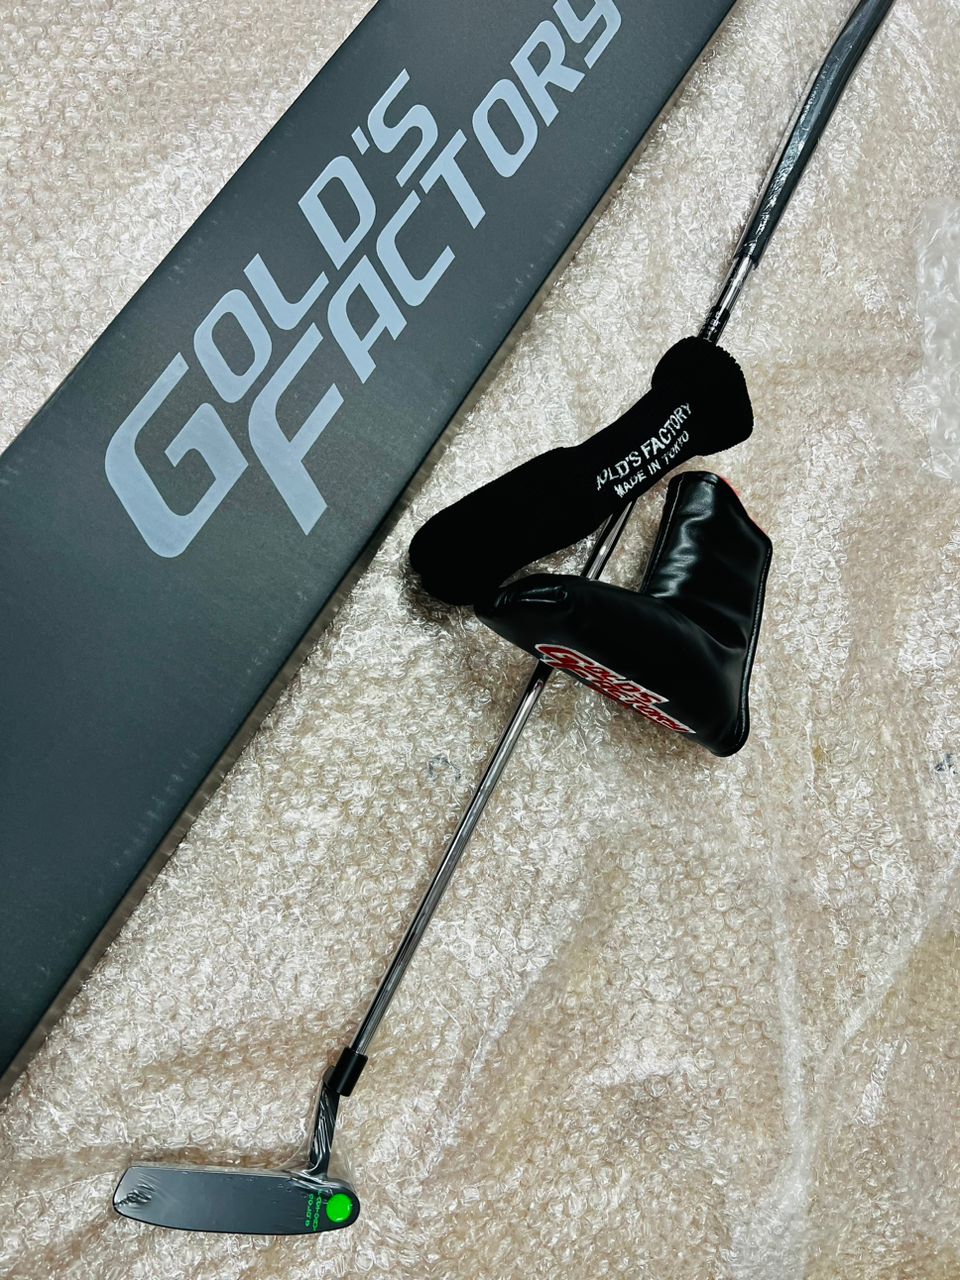 GOLD'S FACTORY 4039 - NEWPORT 1 GSS 350 STYLE PUTTER